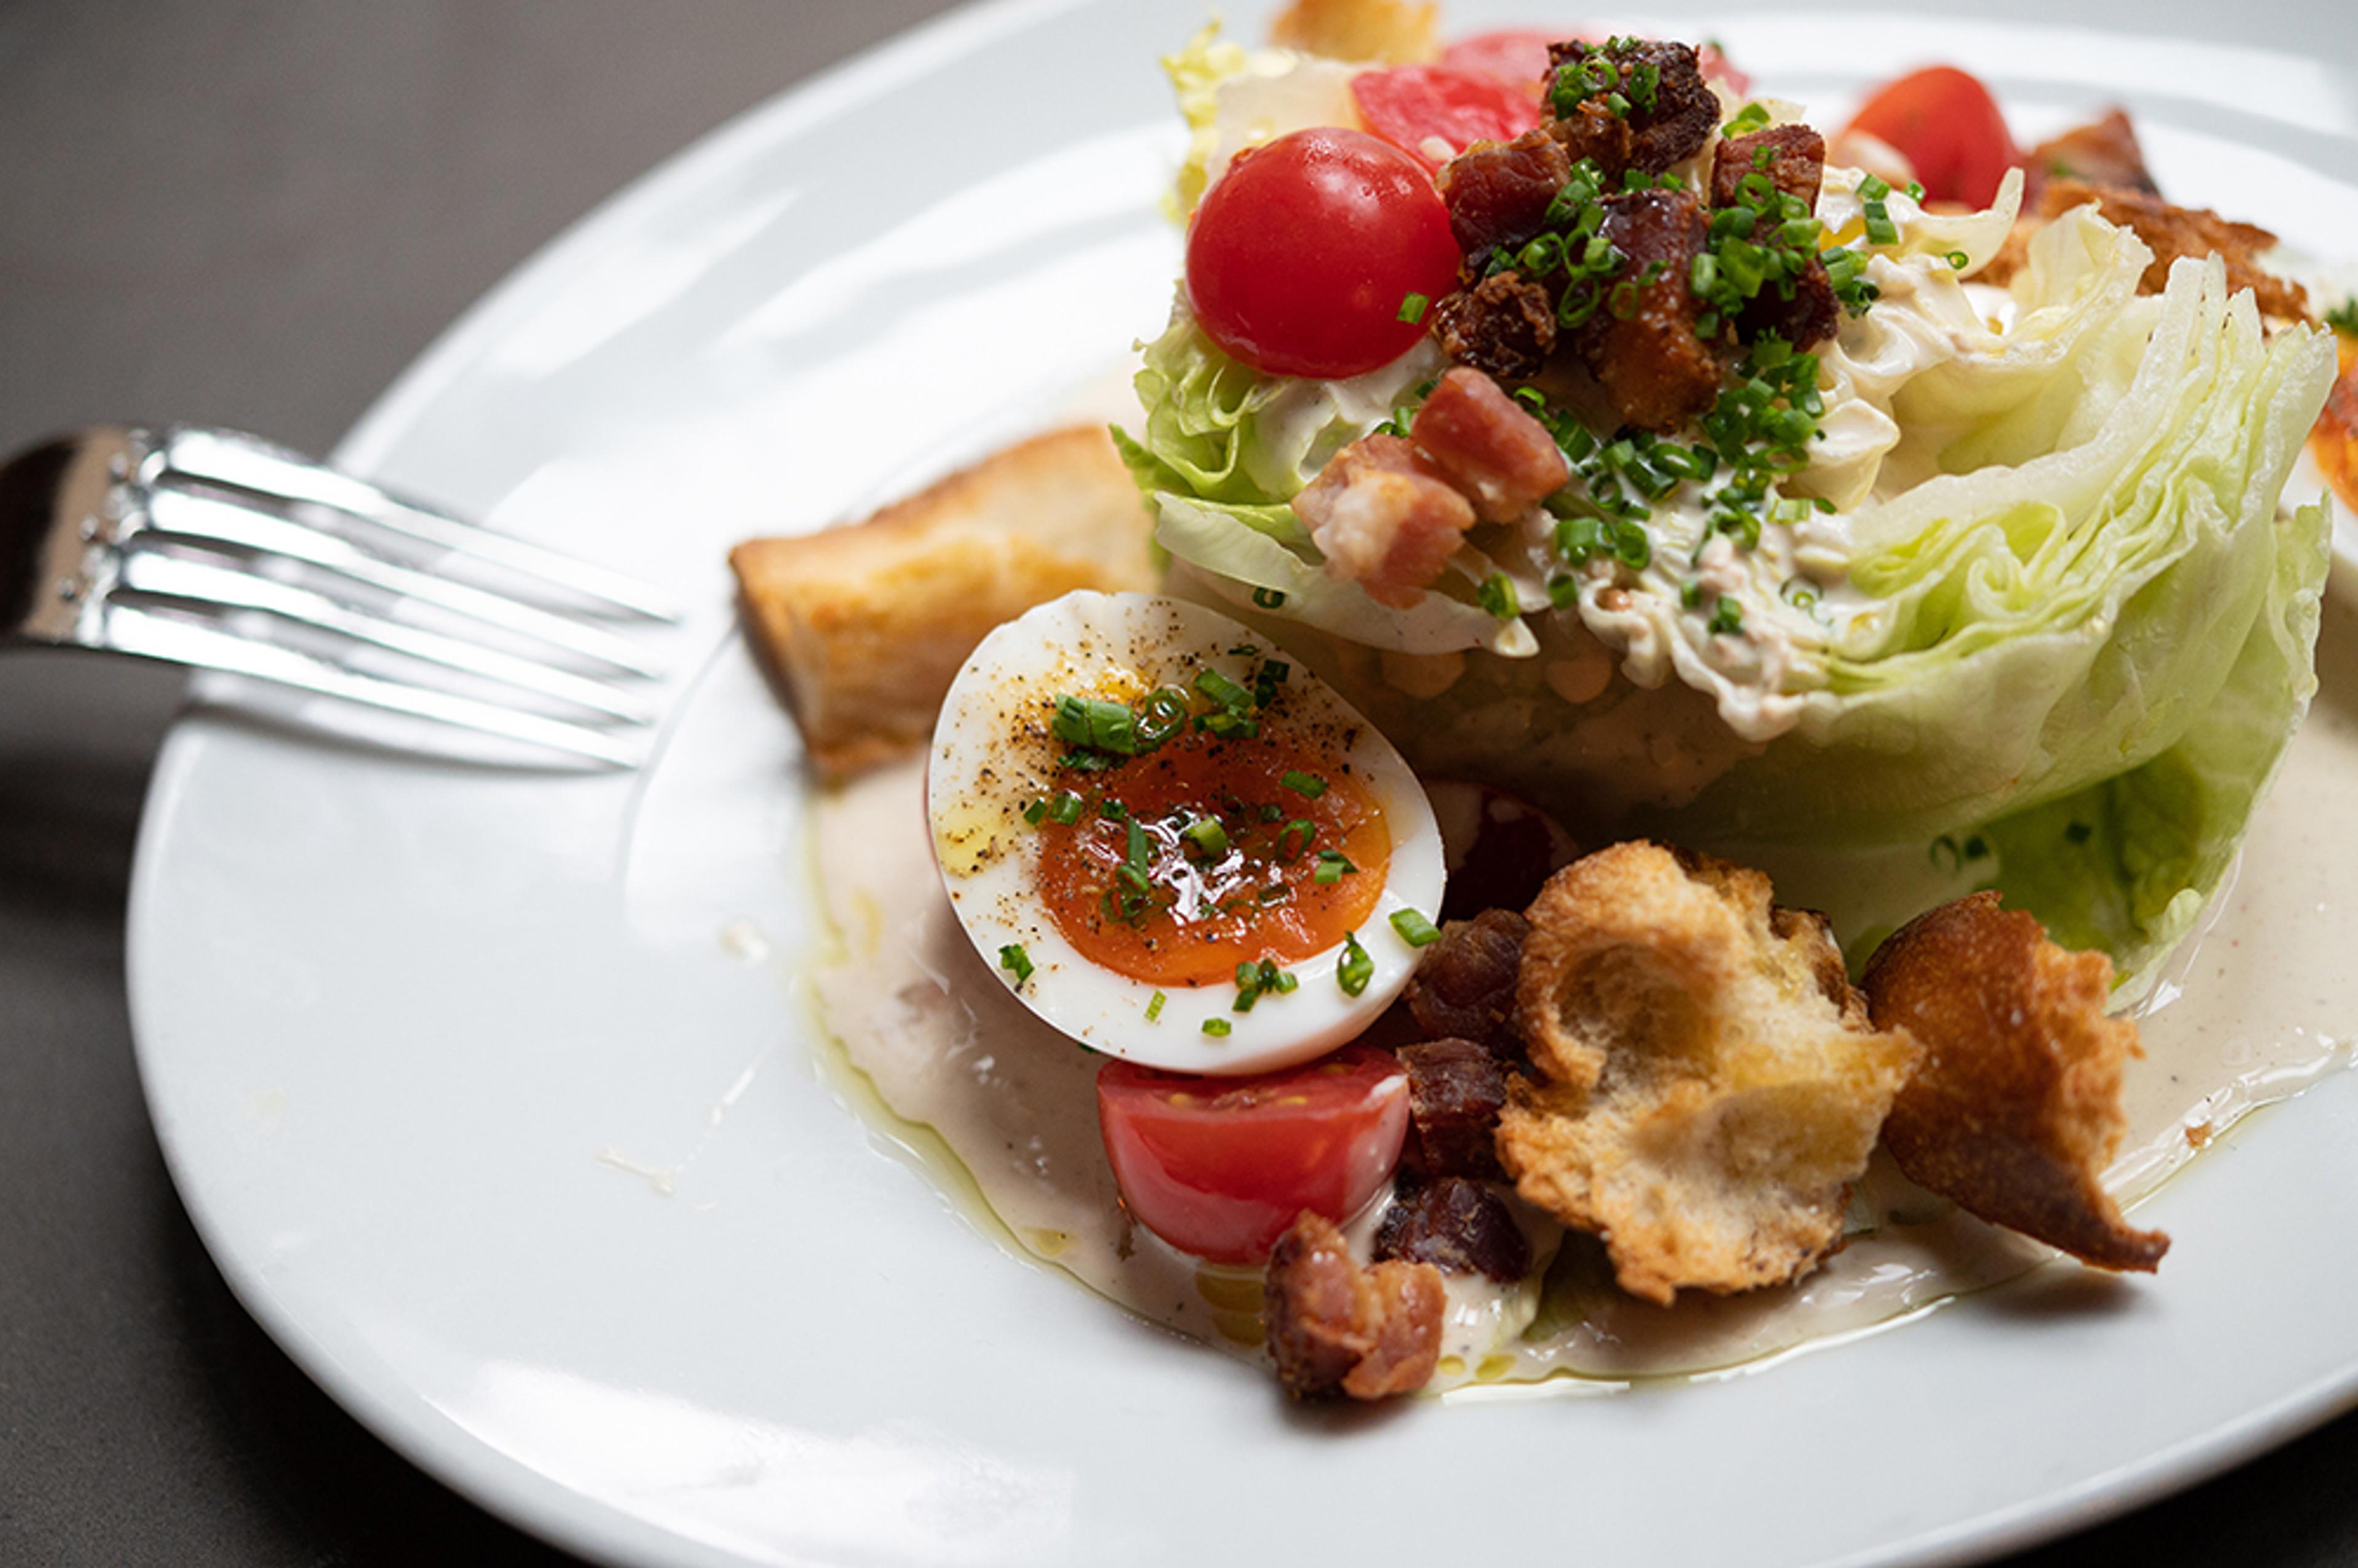 Wedge salad with soft boiled eggs, hand torn croutons, tomatoes and bacon